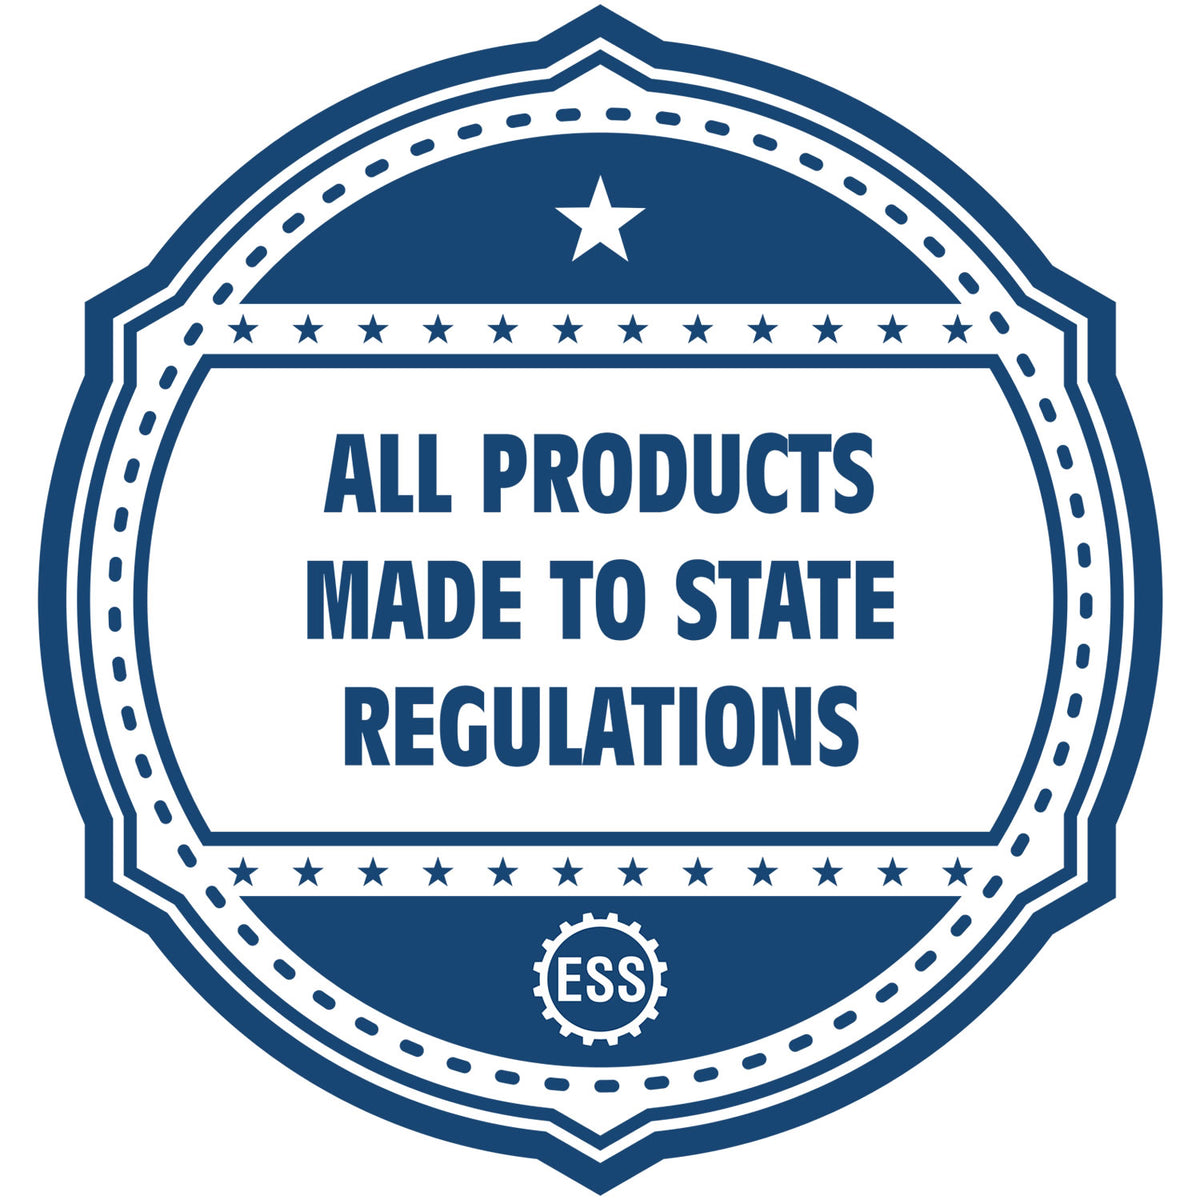 An icon or badge element for the Heavy-Duty Iowa Rectangular Notary Stamp showing that this product is made in compliance with state regulations.